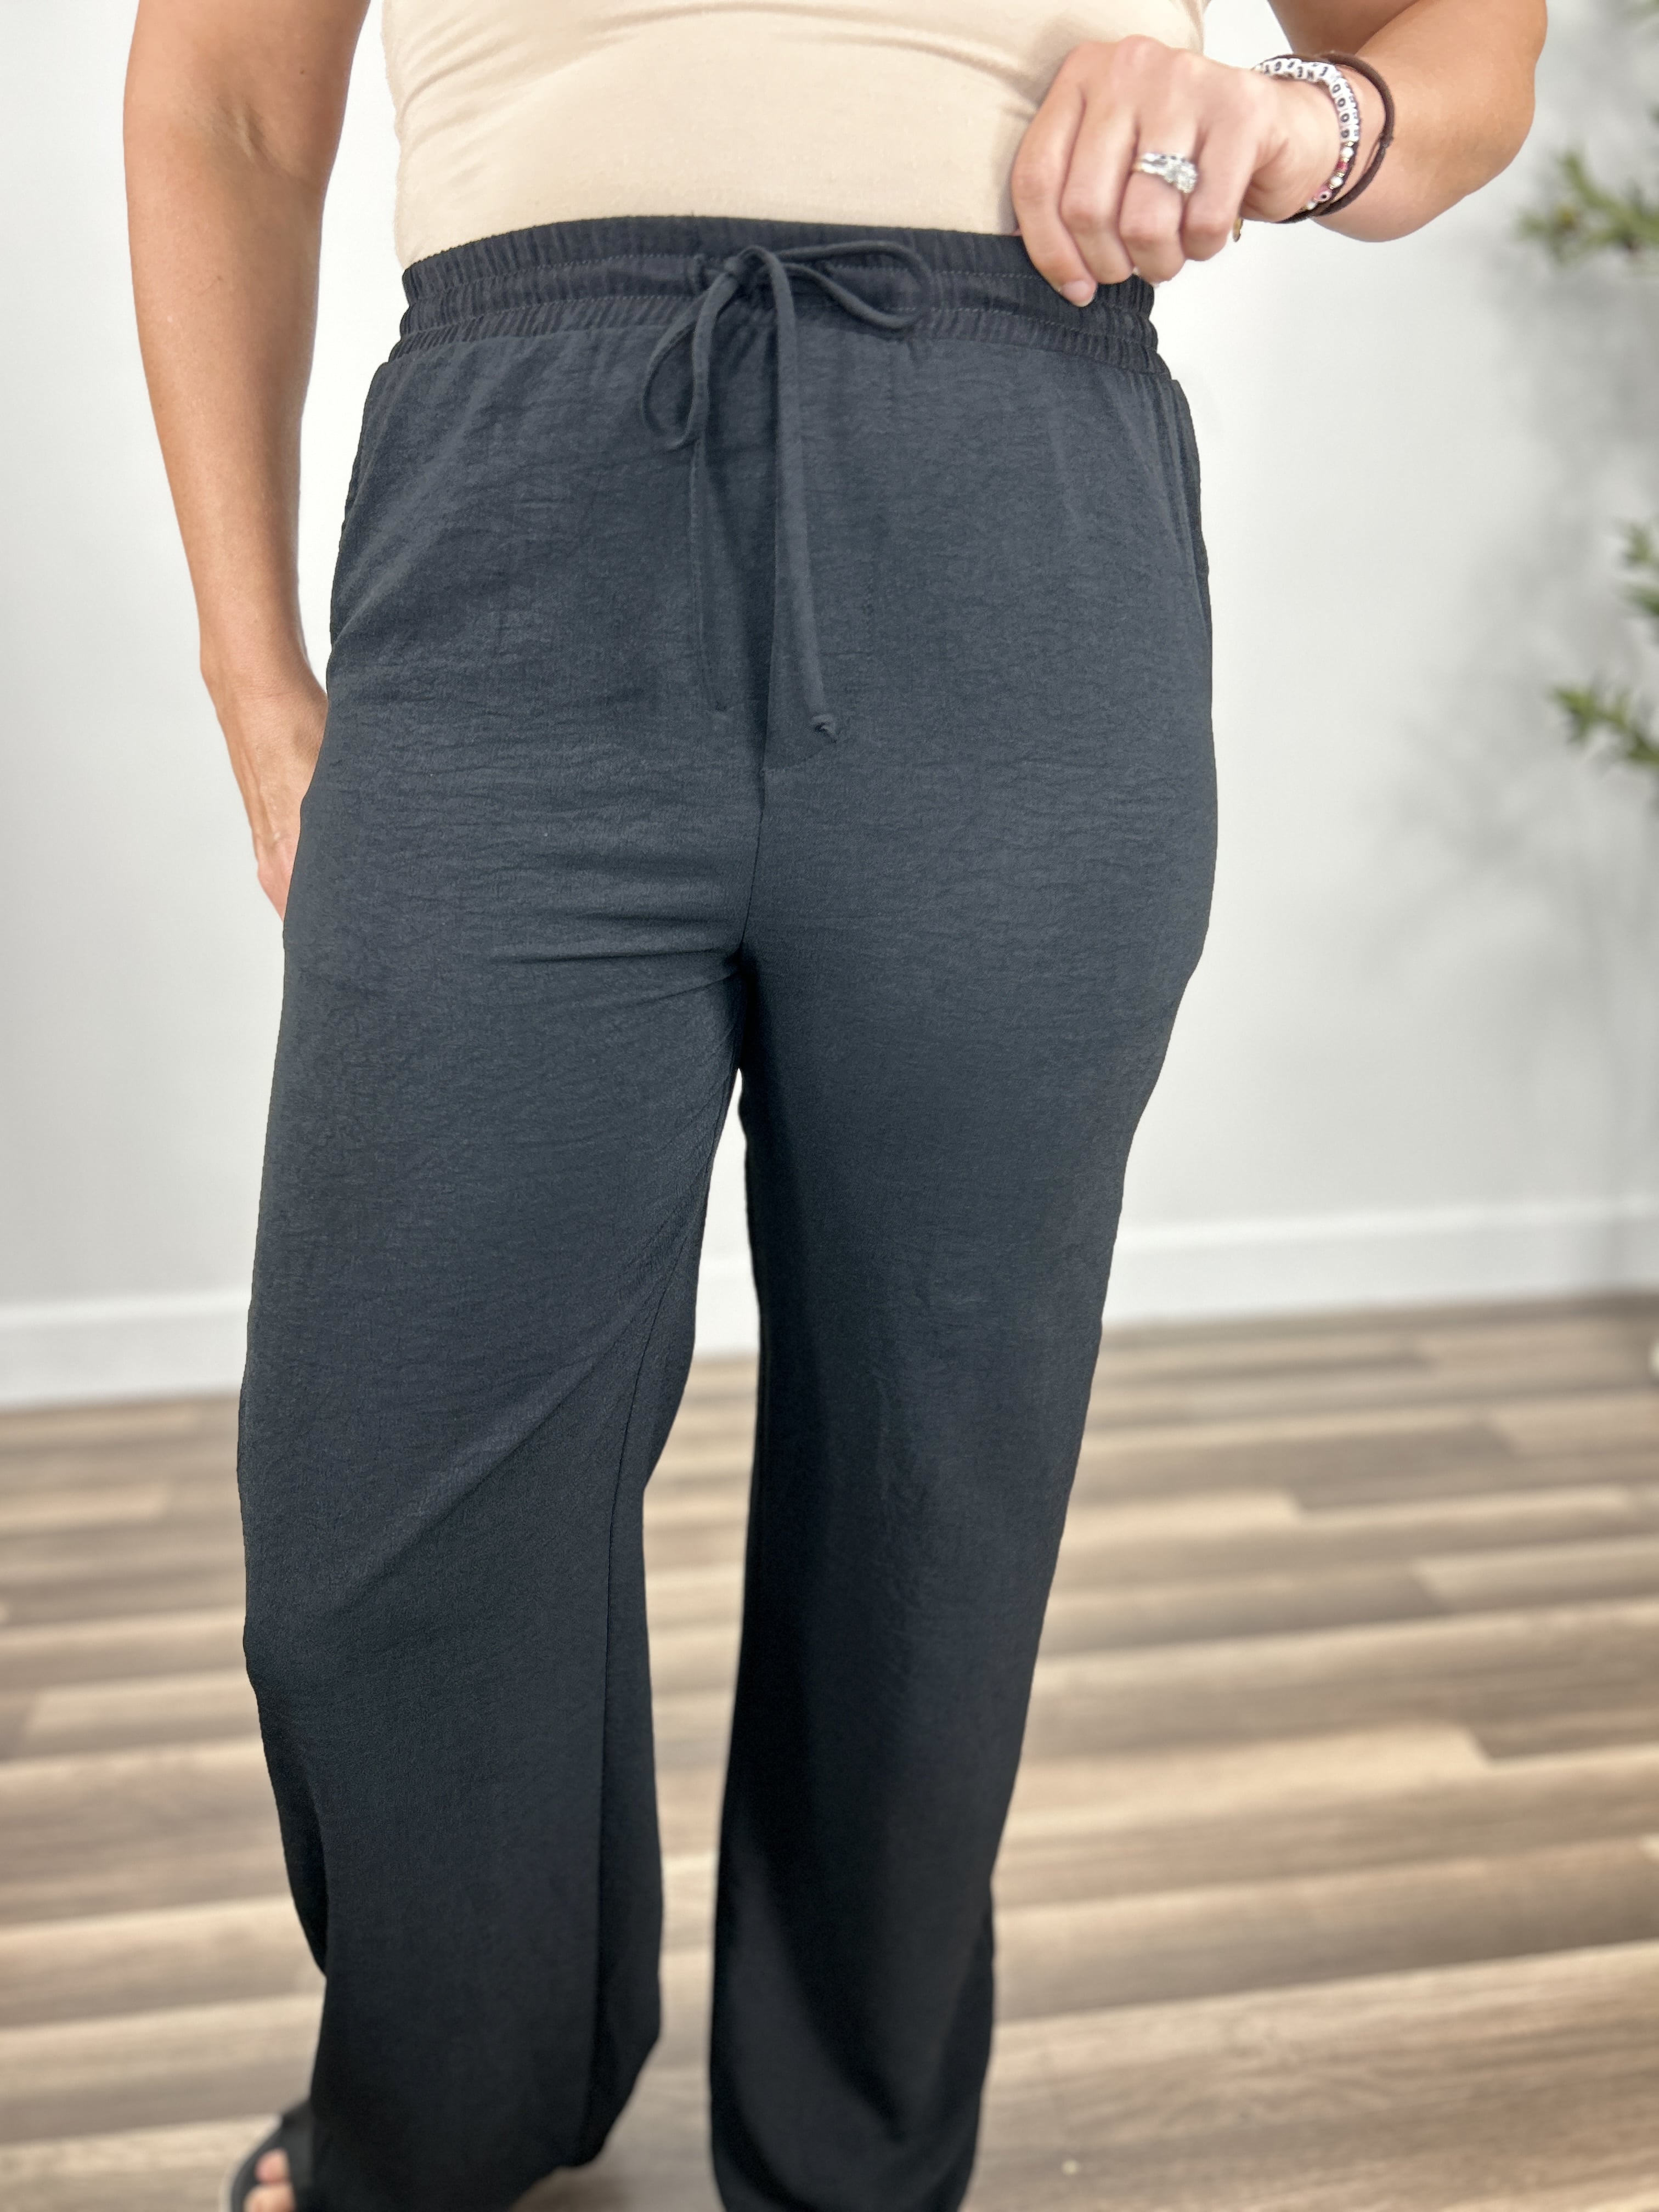 Upclose view of the black elastic waist dress pants for women.